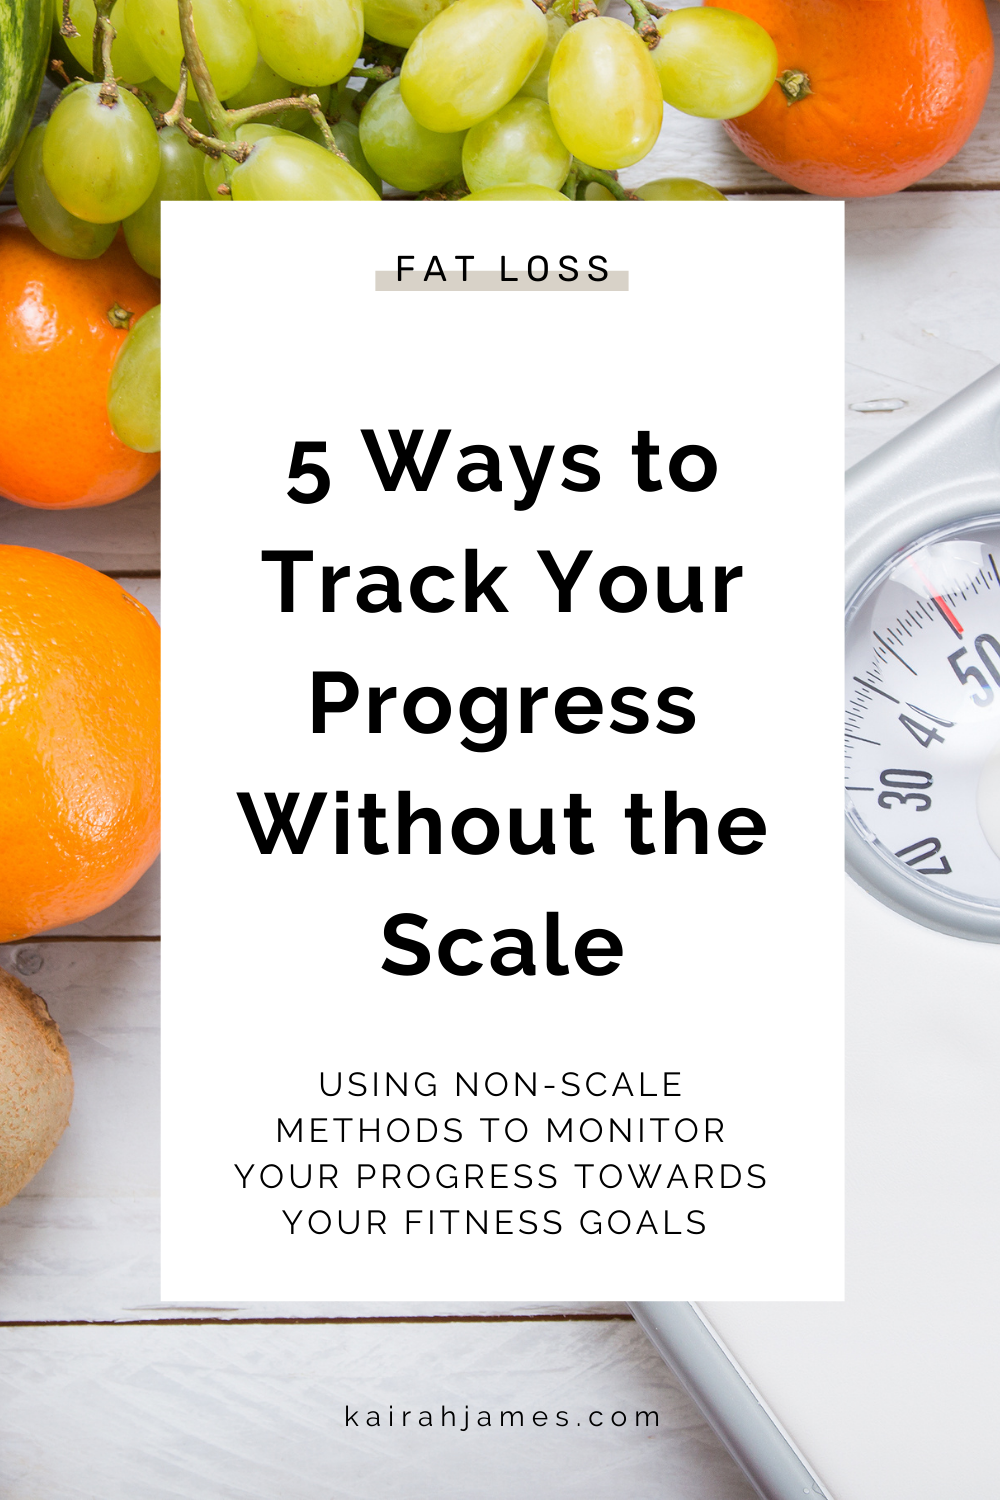 Want to know how to track your fitness progress without having to use the scale? Here are 5 non-scale ways to keep track of how you’re progressing towards your fitness goals. | Ditch the Scale | Track Your Progress | Weight Loss Progress #progresstracker #fitnesstracker #healthgoals via @kairahjames